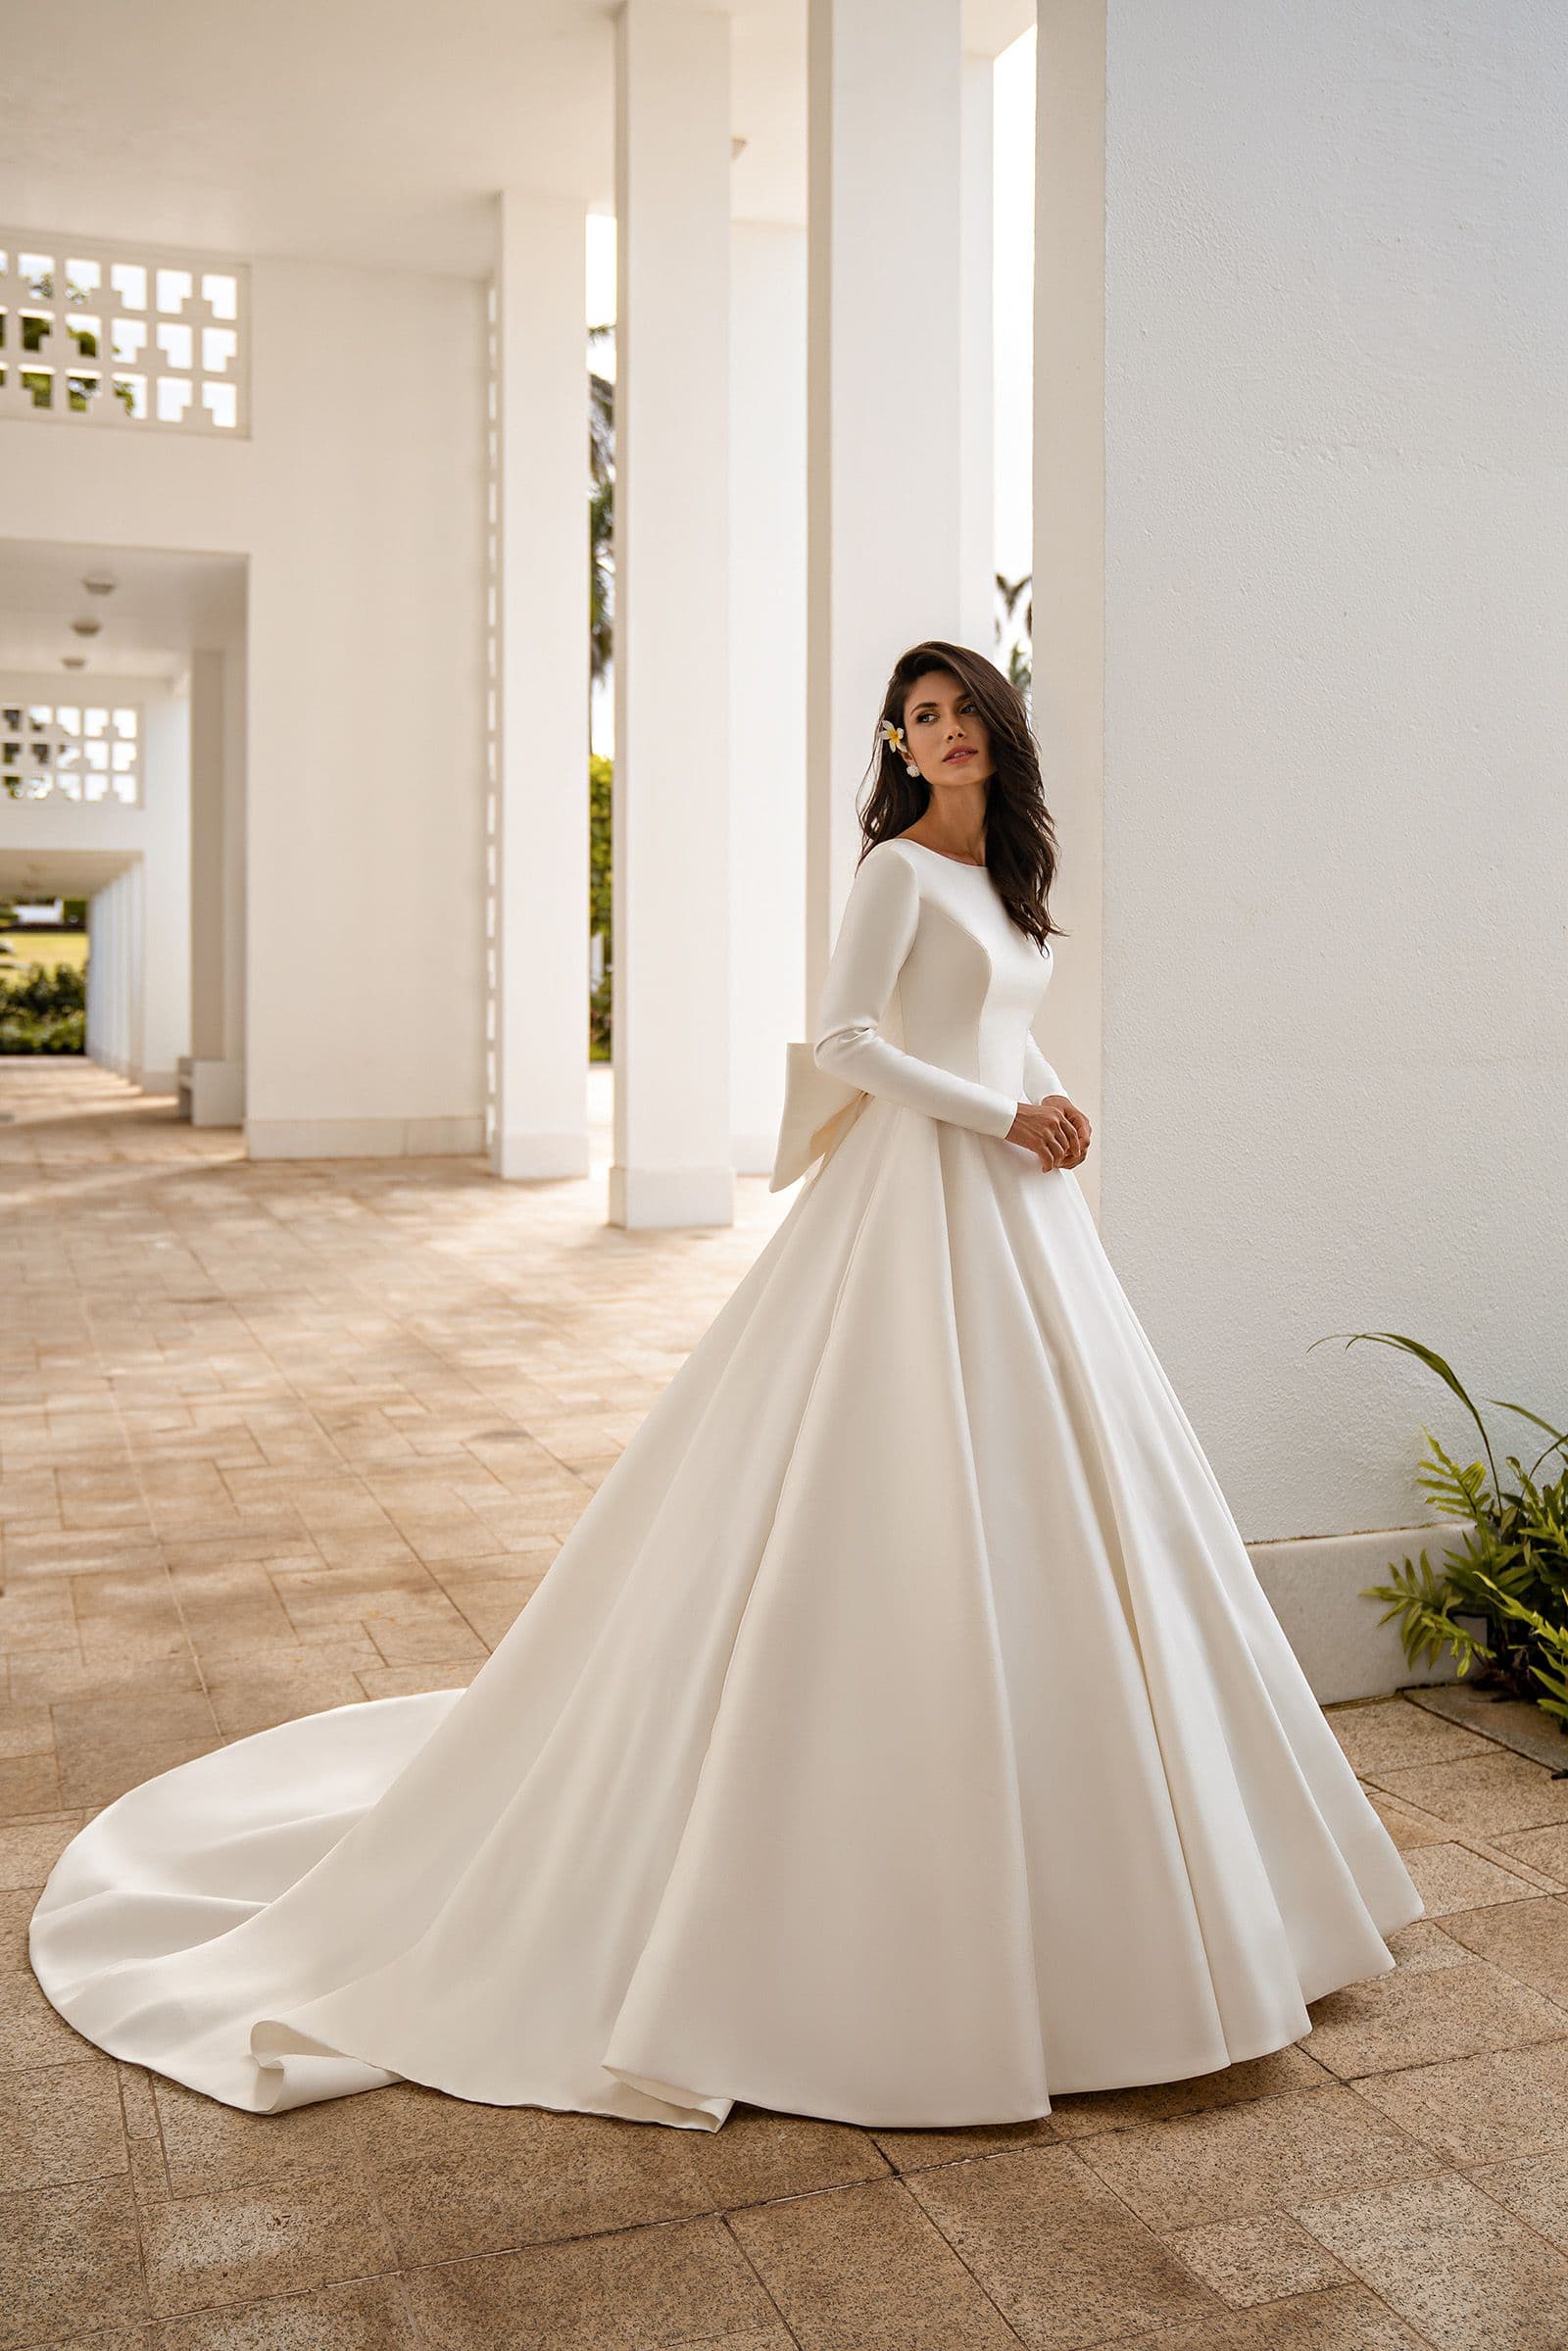 Wedding dress S-661-Leia Product for Sale at NY City Bride